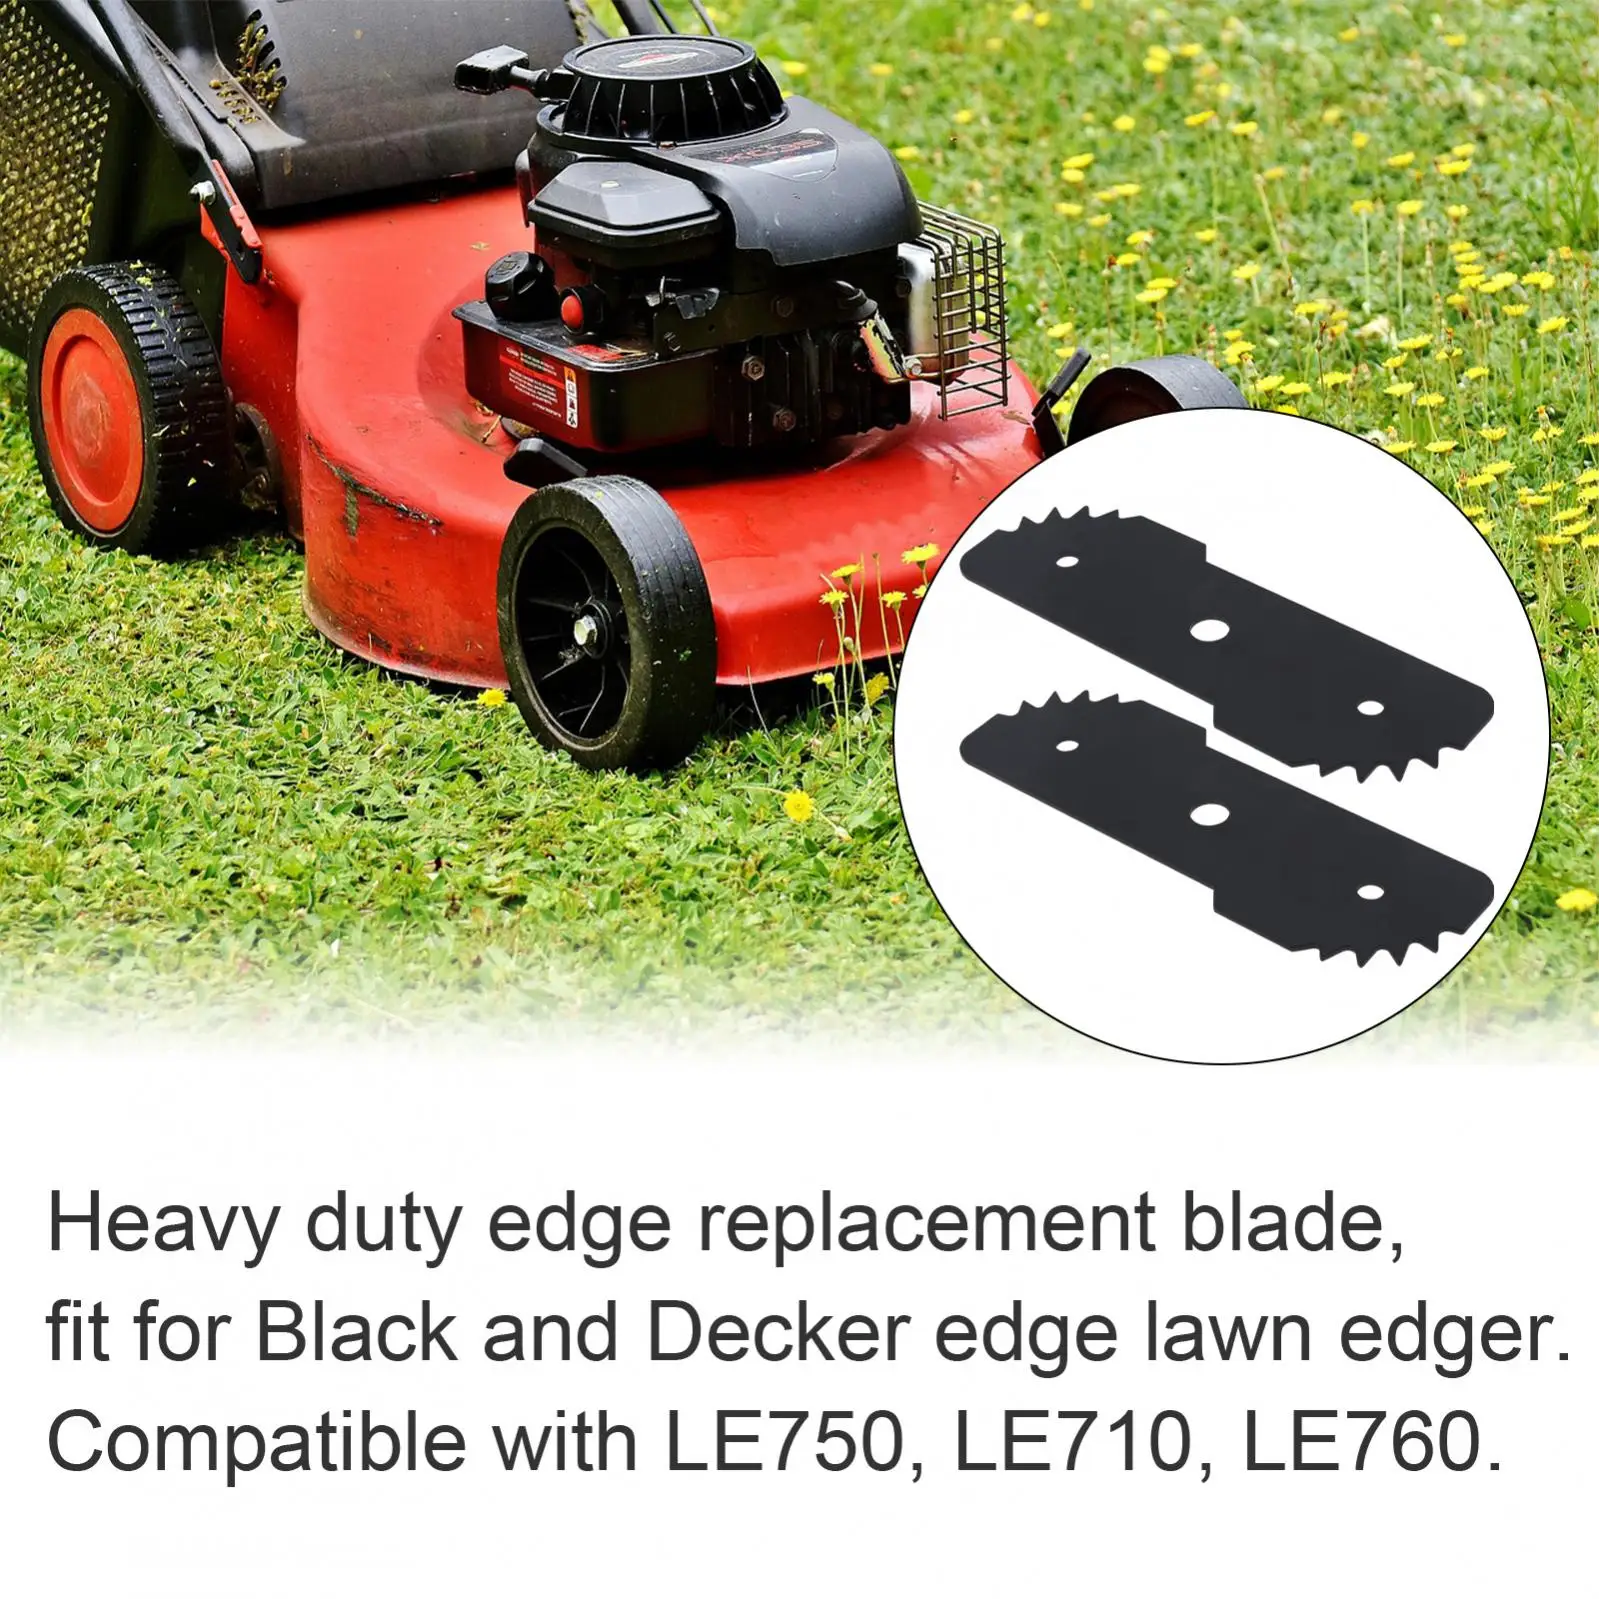 https://ae01.alicdn.com/kf/Sbc349c256fc243288e7beb060b6a7de7g/2PCS-Edger-Blade-Electric-Grinding-Machine-Blades-Heavy-Duty-Lawn-Edge-Blades-Replacements-Fit-for-Black.jpg